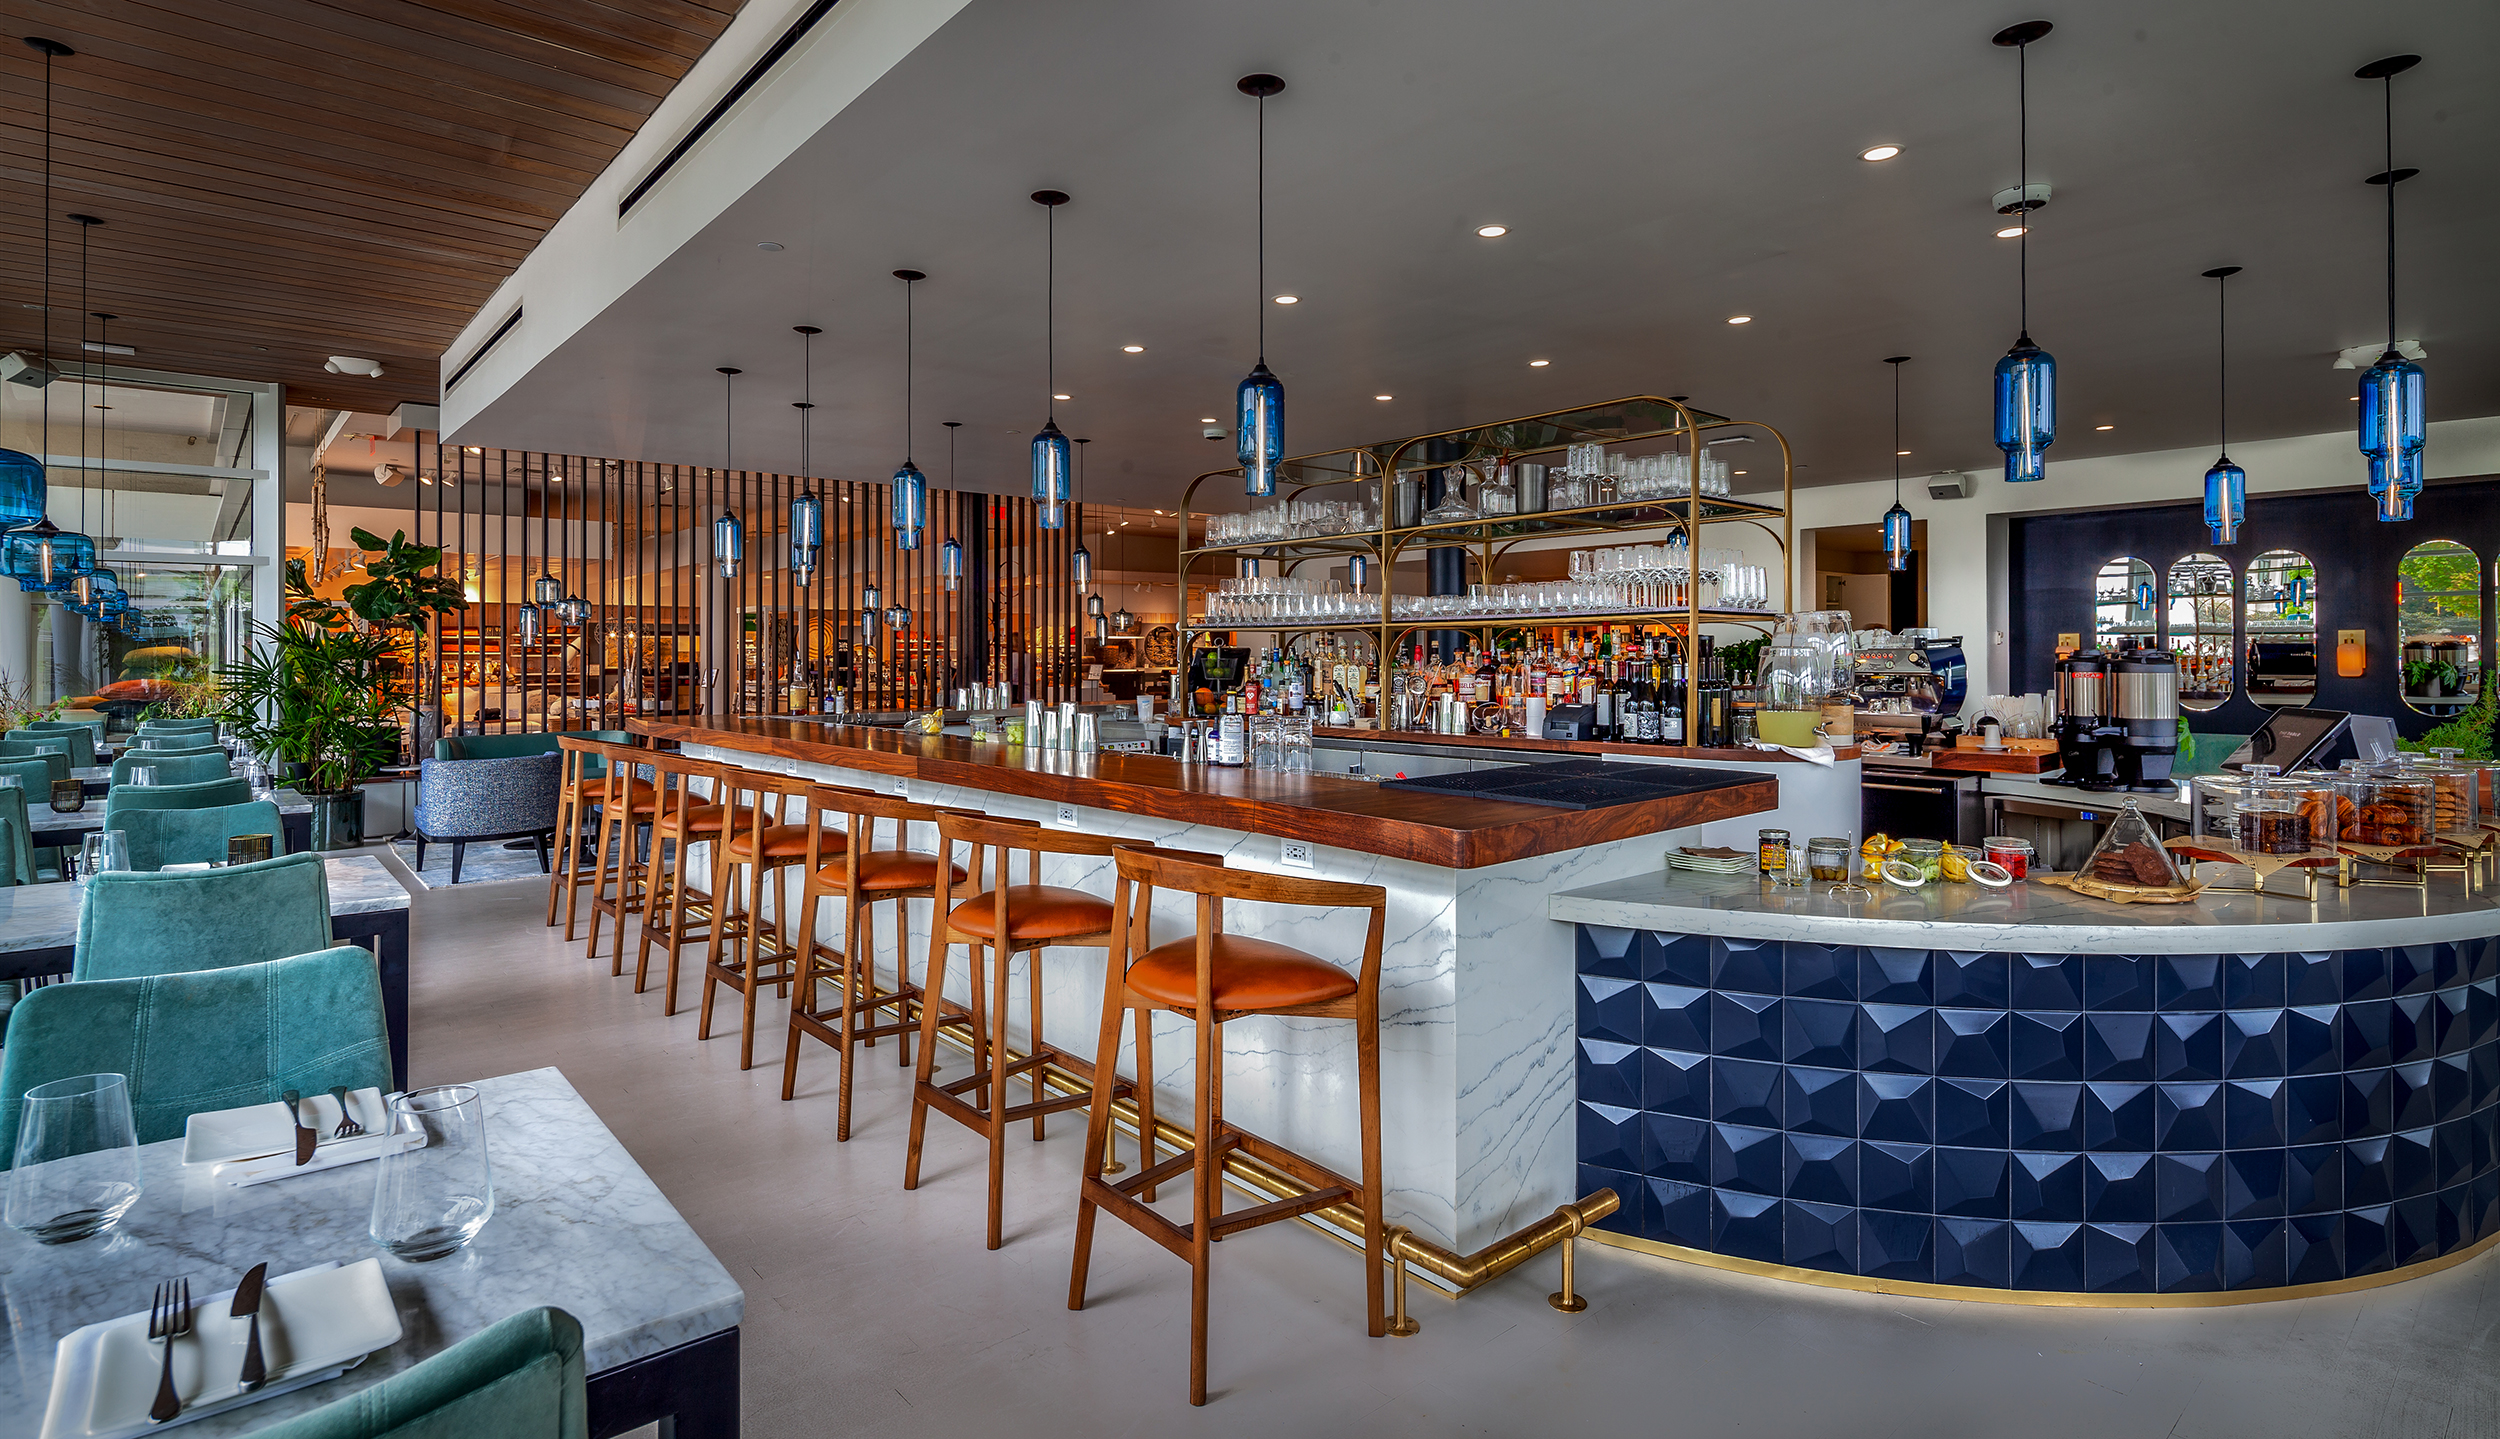 These 3 Eateries Showcase the Latest Trends in Restaurant Design